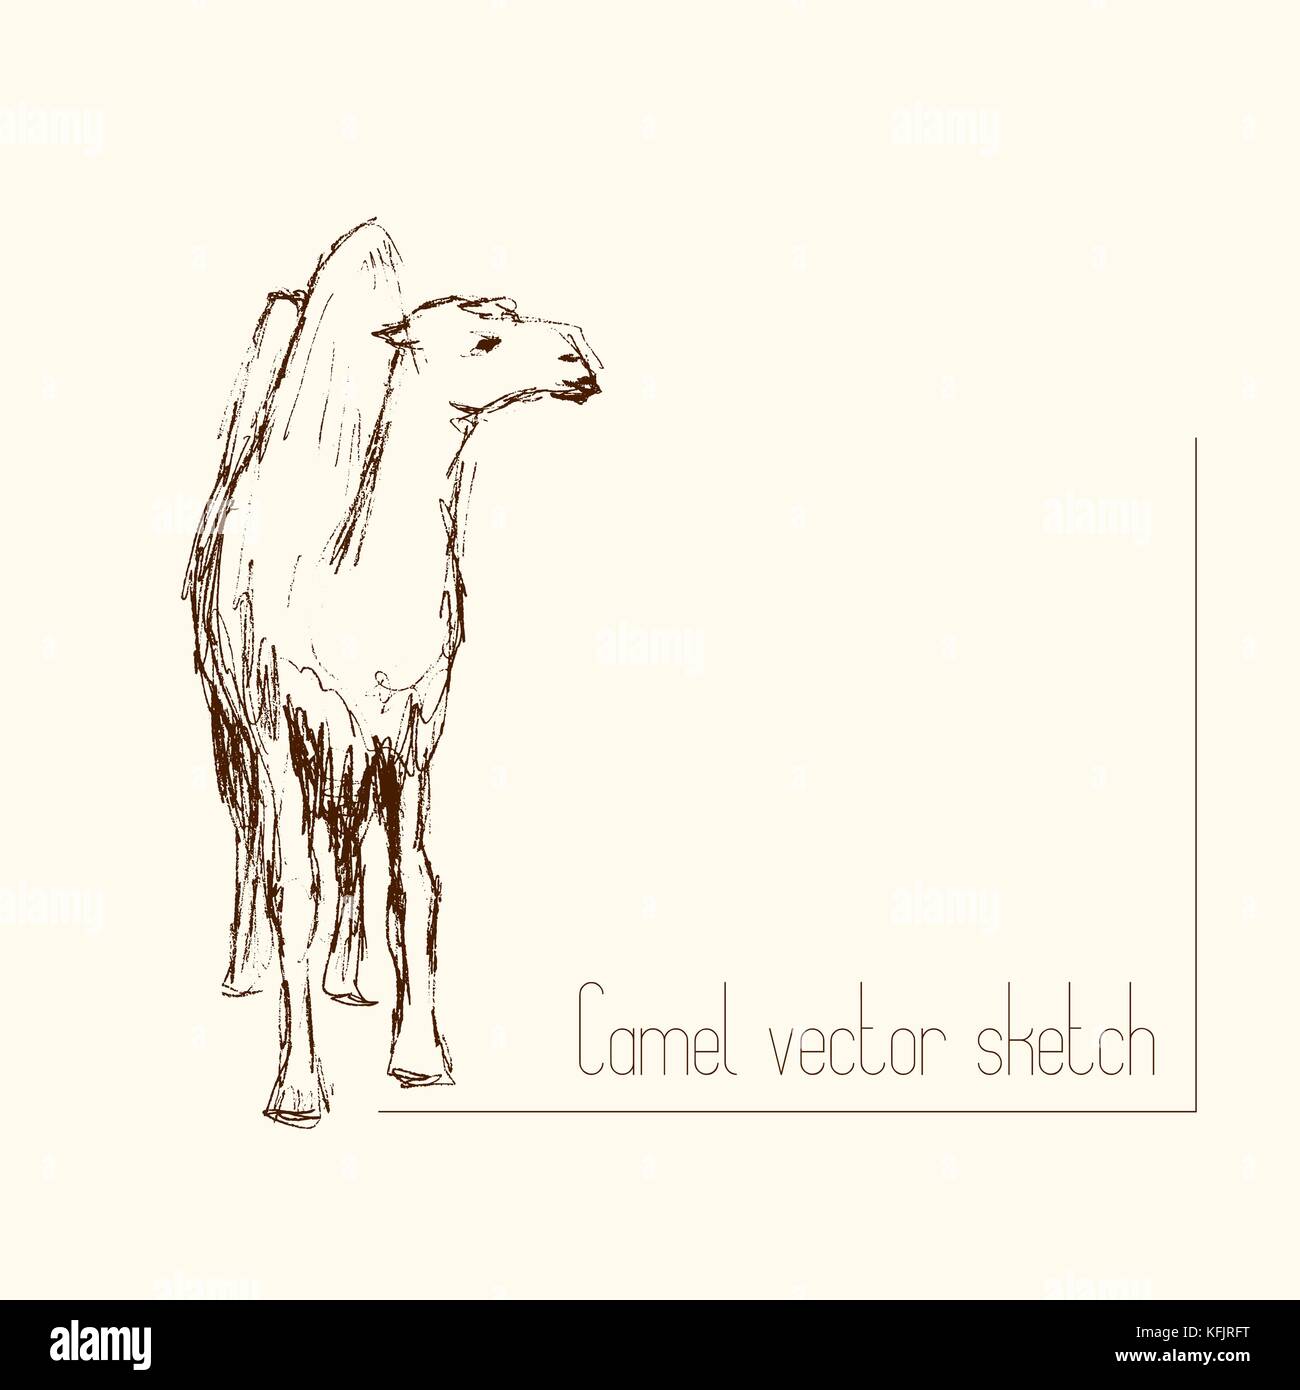 How to Draw a Camel  Envato Tuts